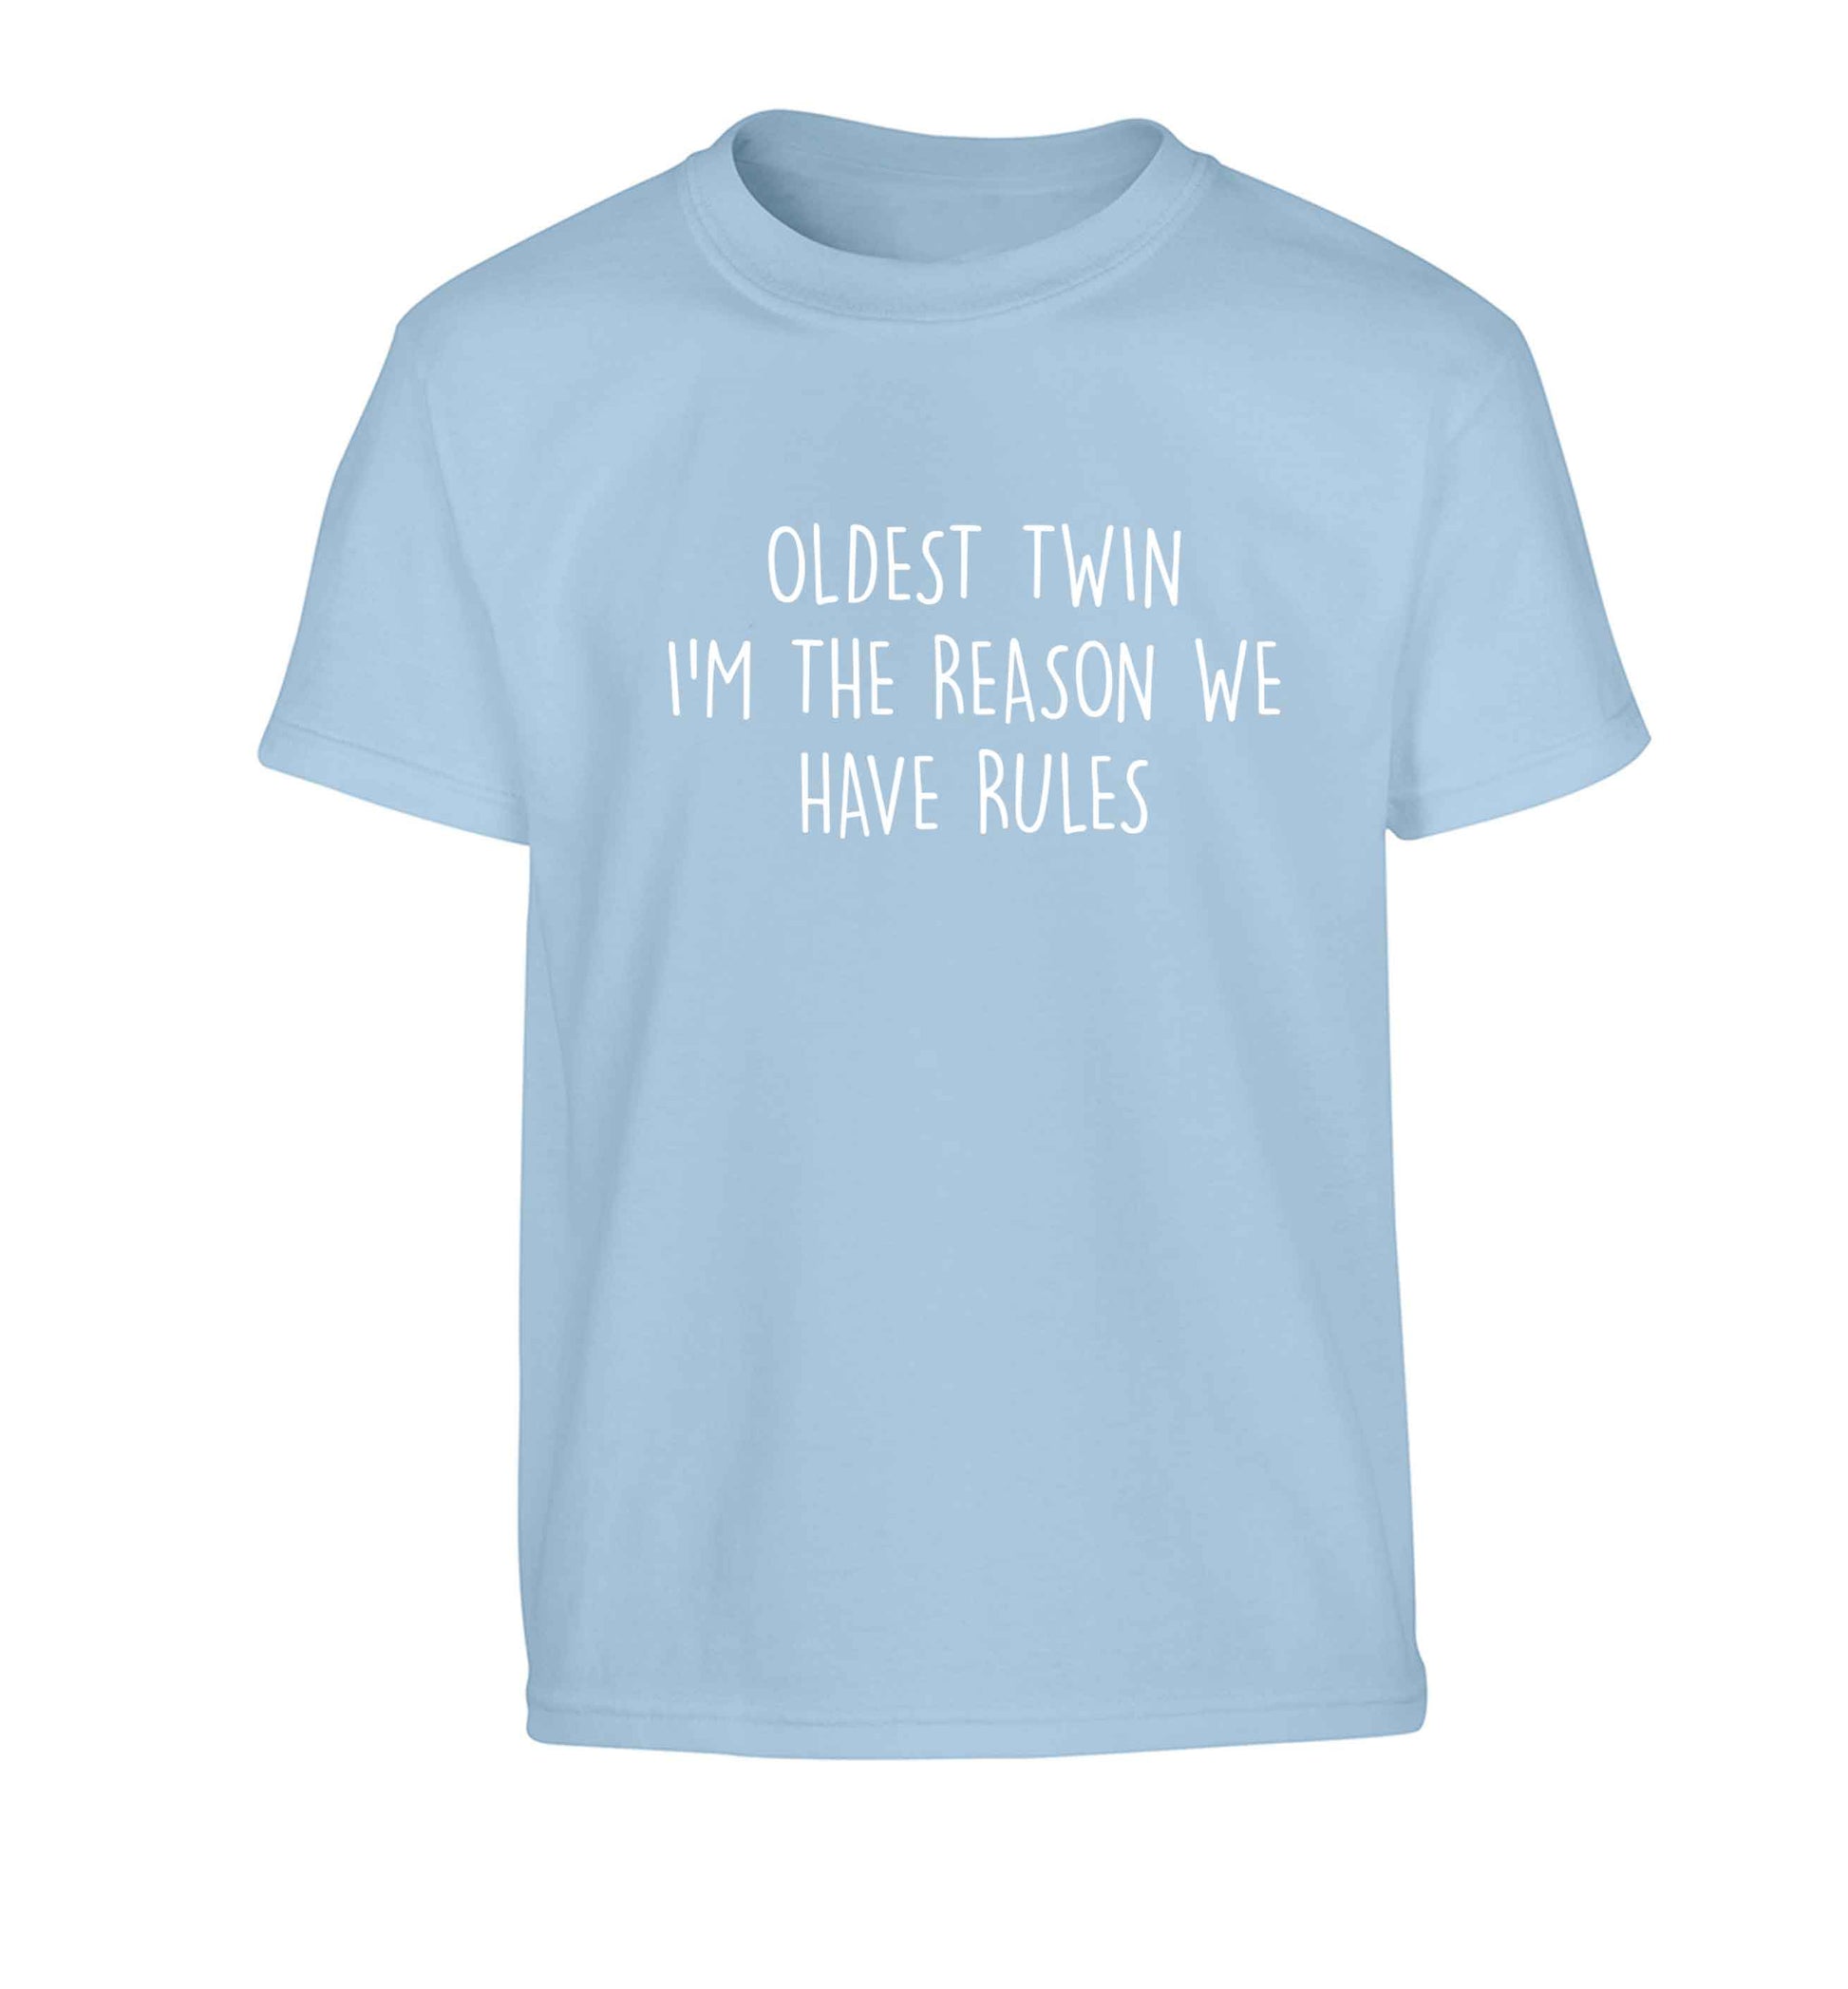 Oldest twin I'm the reason we have rules Children's light blue Tshirt 12-13 Years